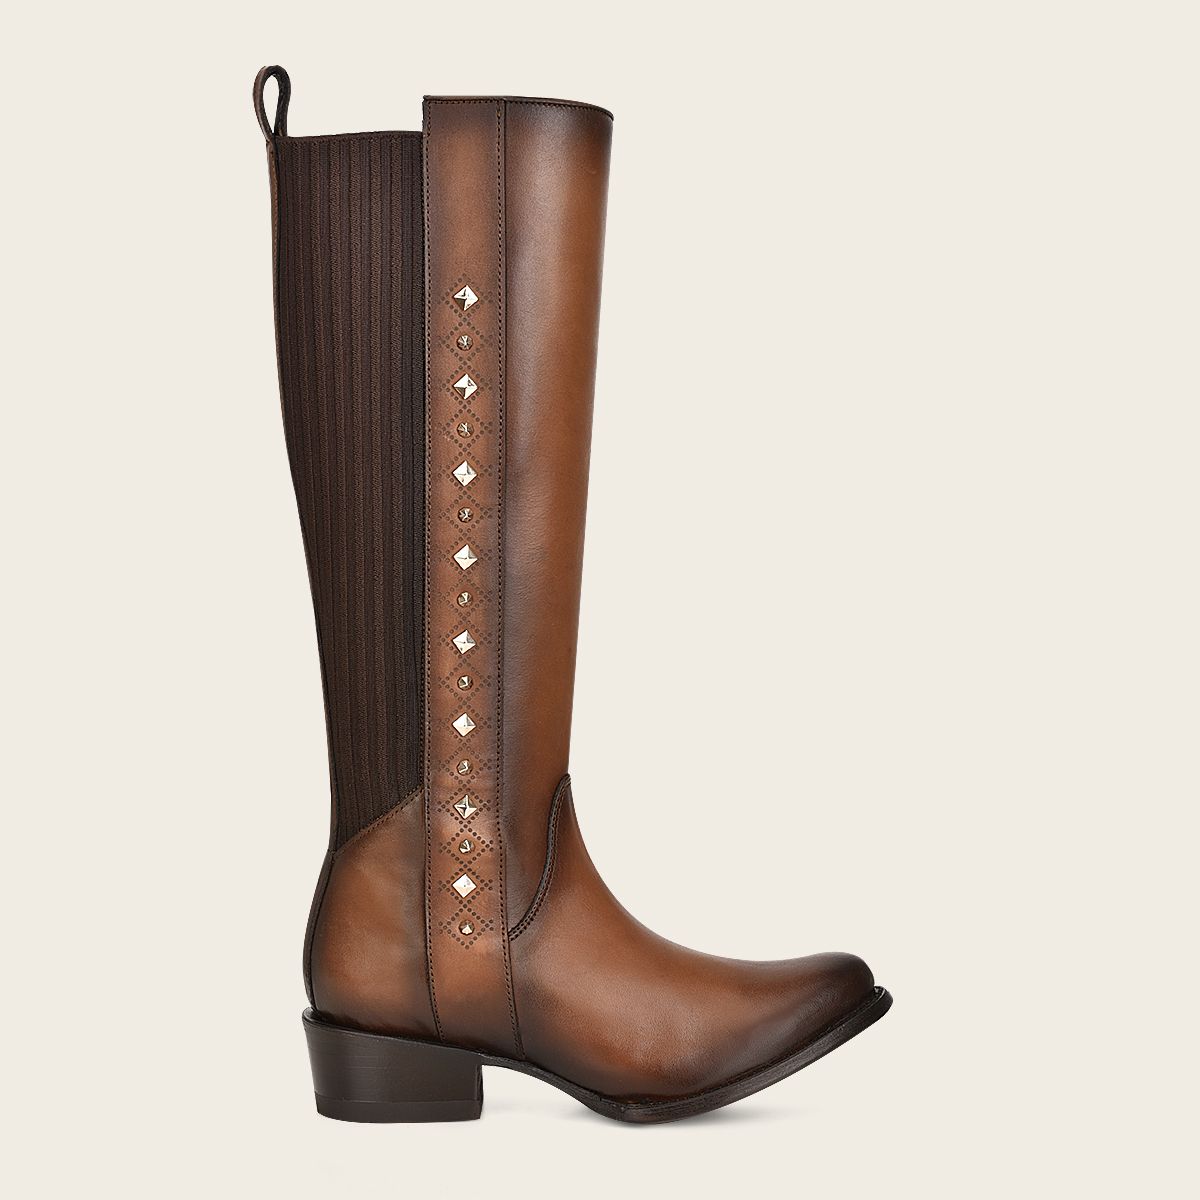 Brown high boot with laser engraving and studs